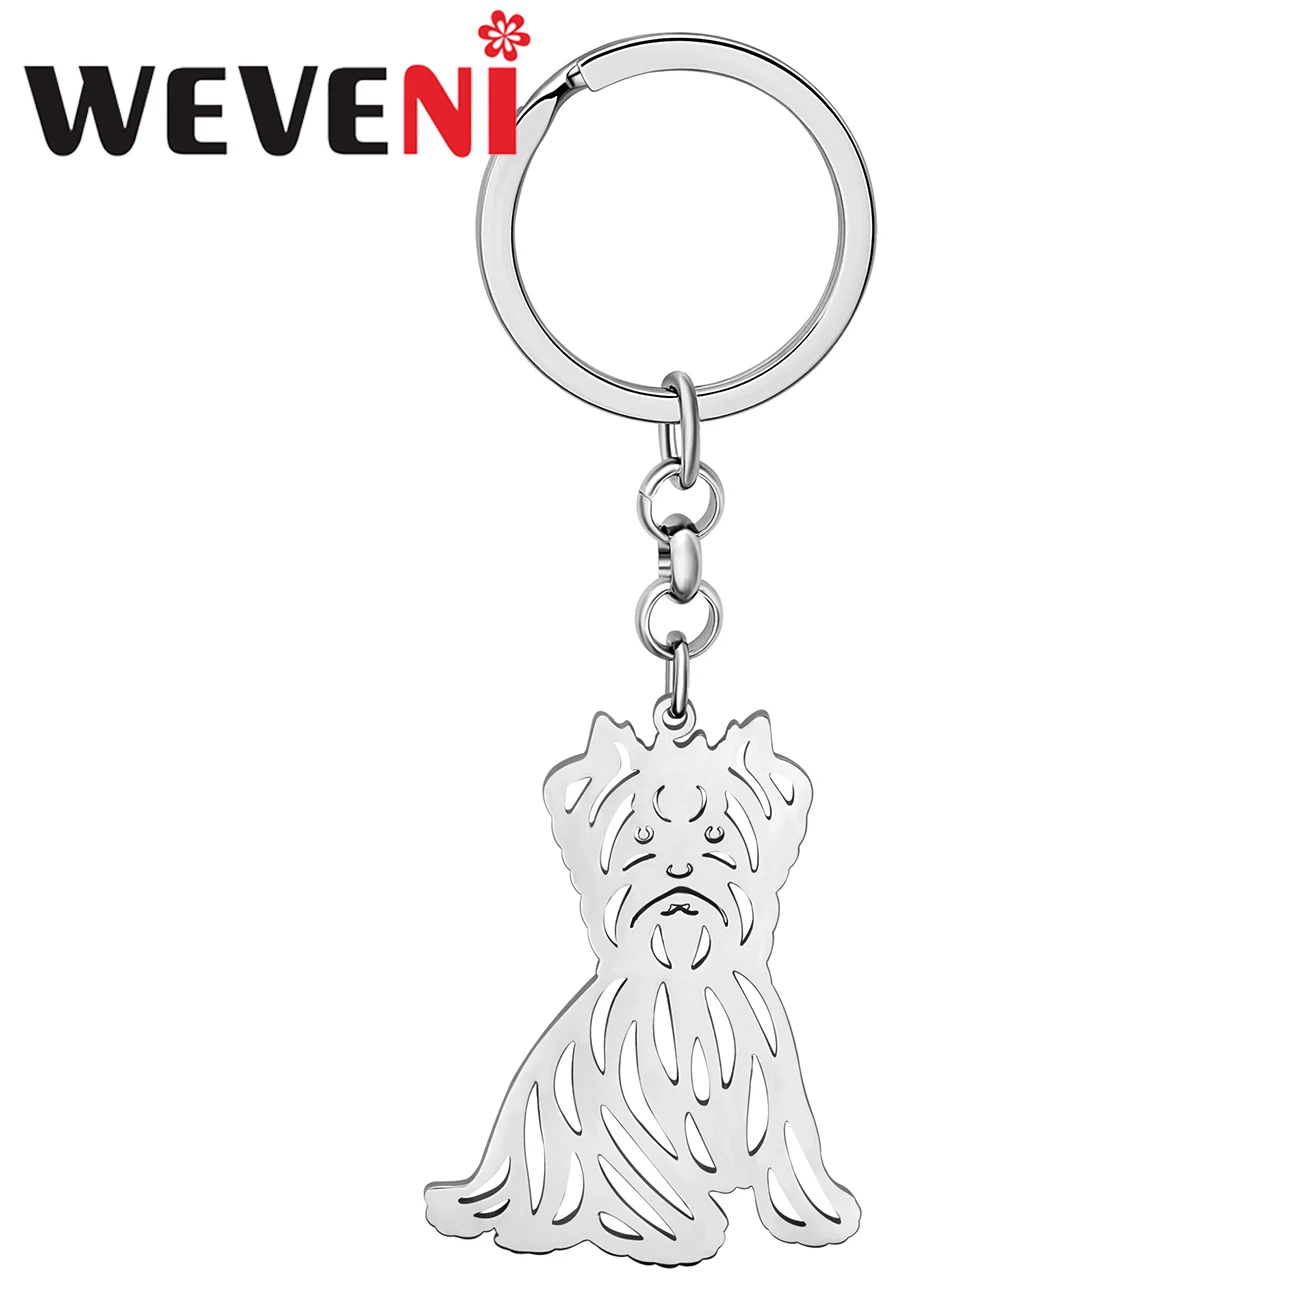 

WEVENI Stainless Steel Silver-plated West Highland White Terrier Dog Keychains Pet Car Key Bag Charms Jewelry For Women Girls